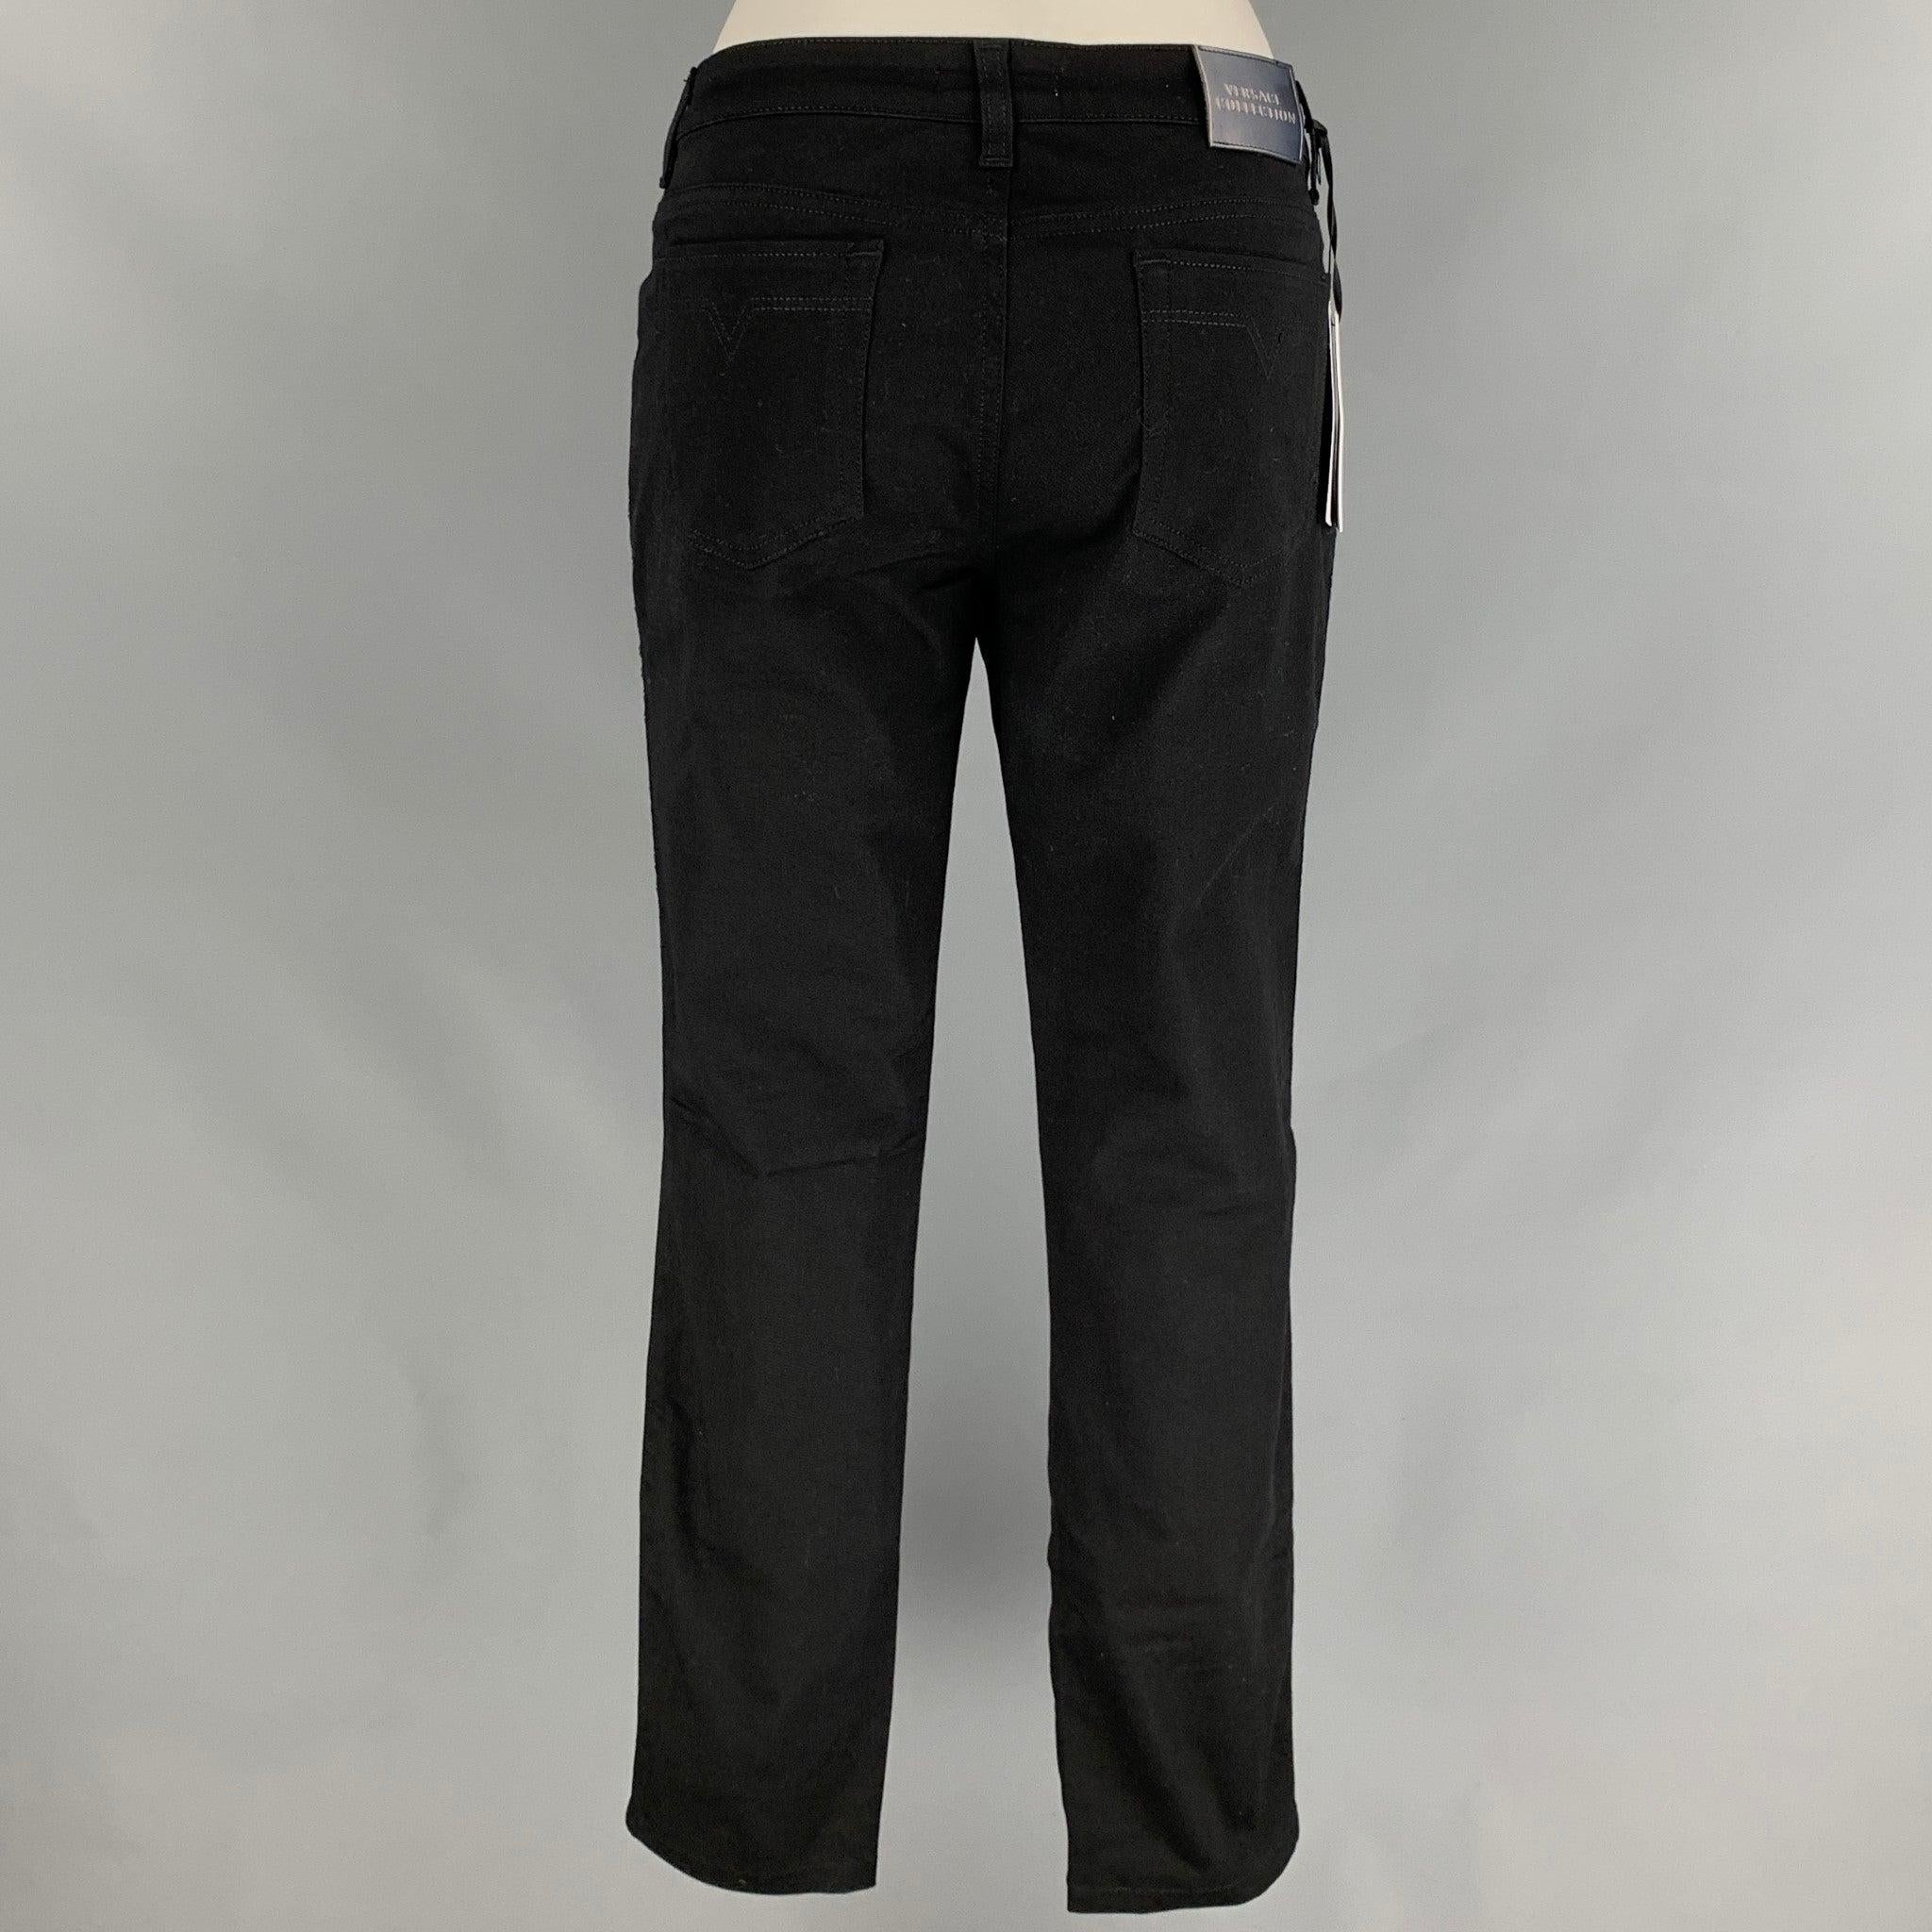 VERSACE COLLECTION Size 24 Black Cotton Blend Studded Skinny Casual Pants In Good Condition For Sale In San Francisco, CA